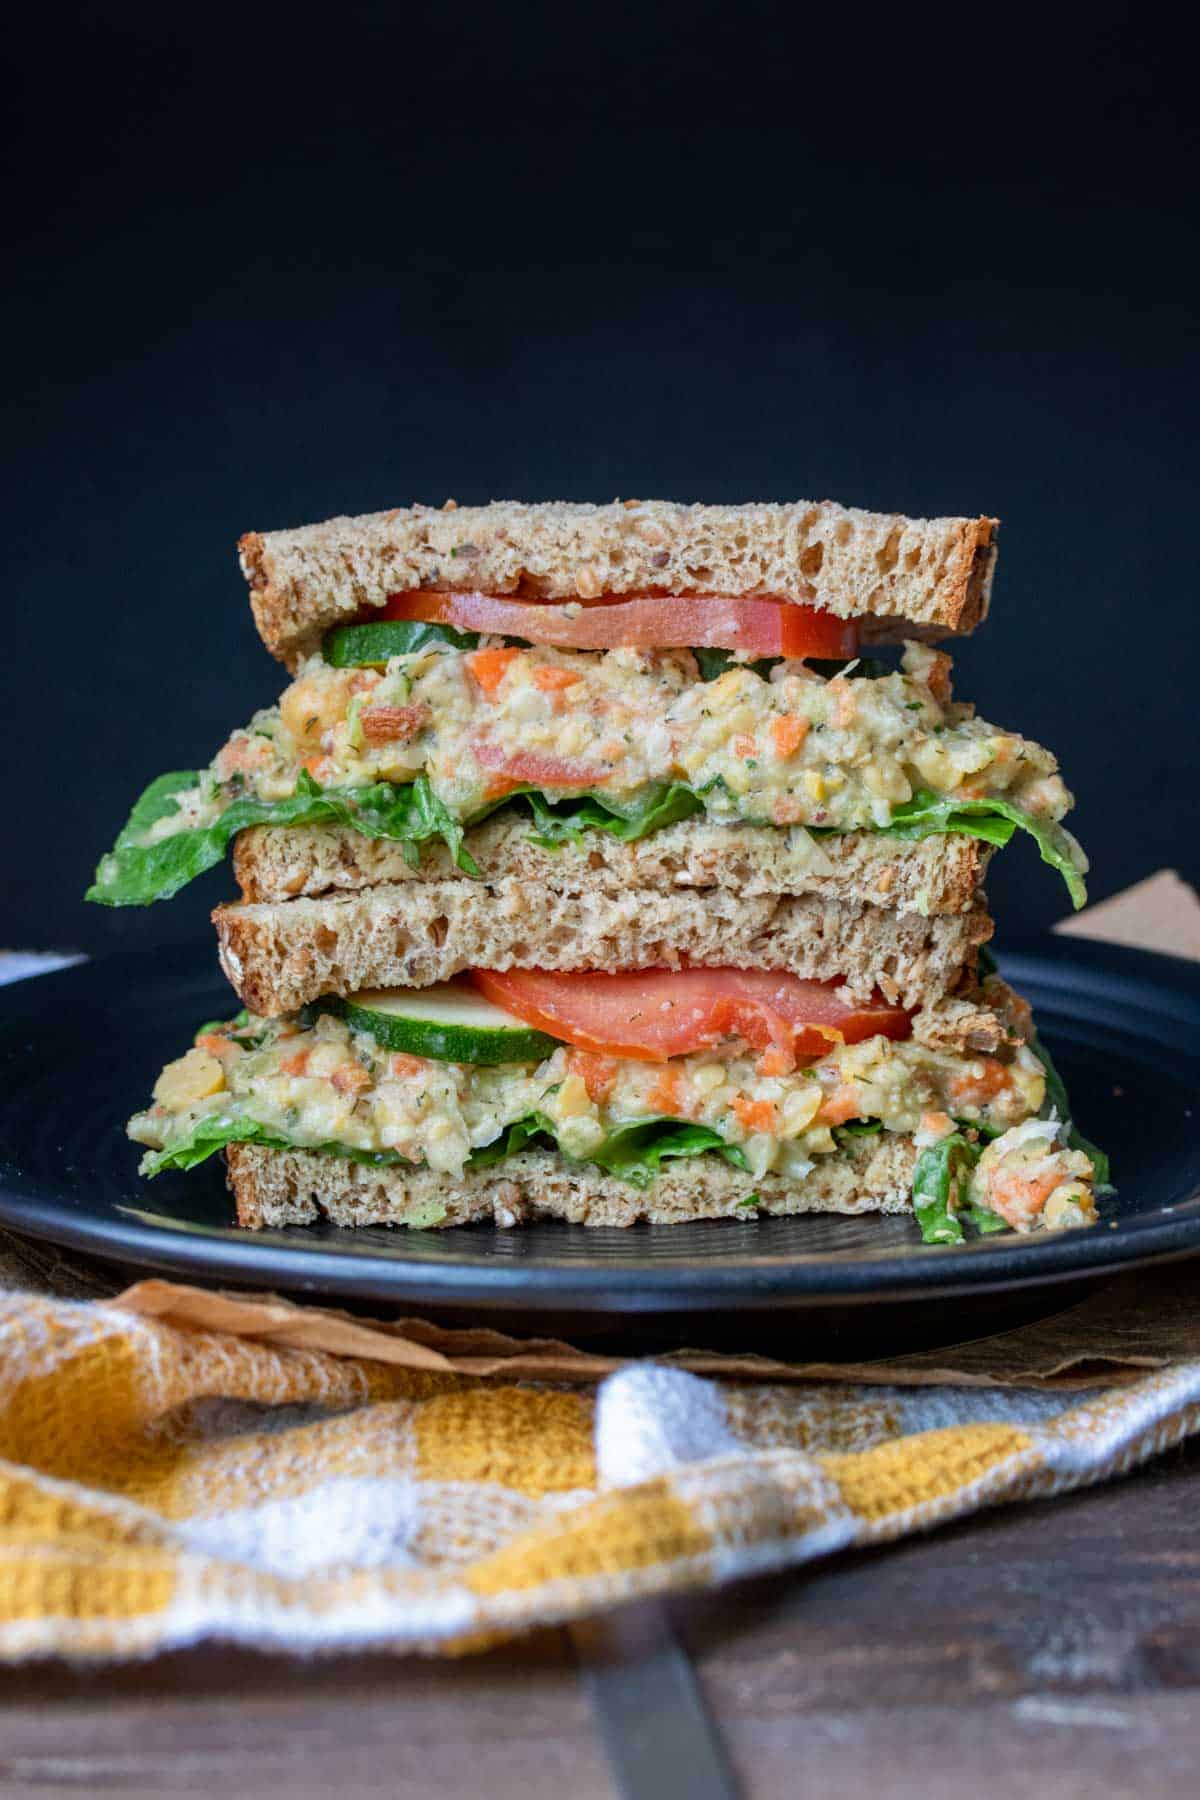 Mashed chickpea salad sandwich with veggies piled on a black plate